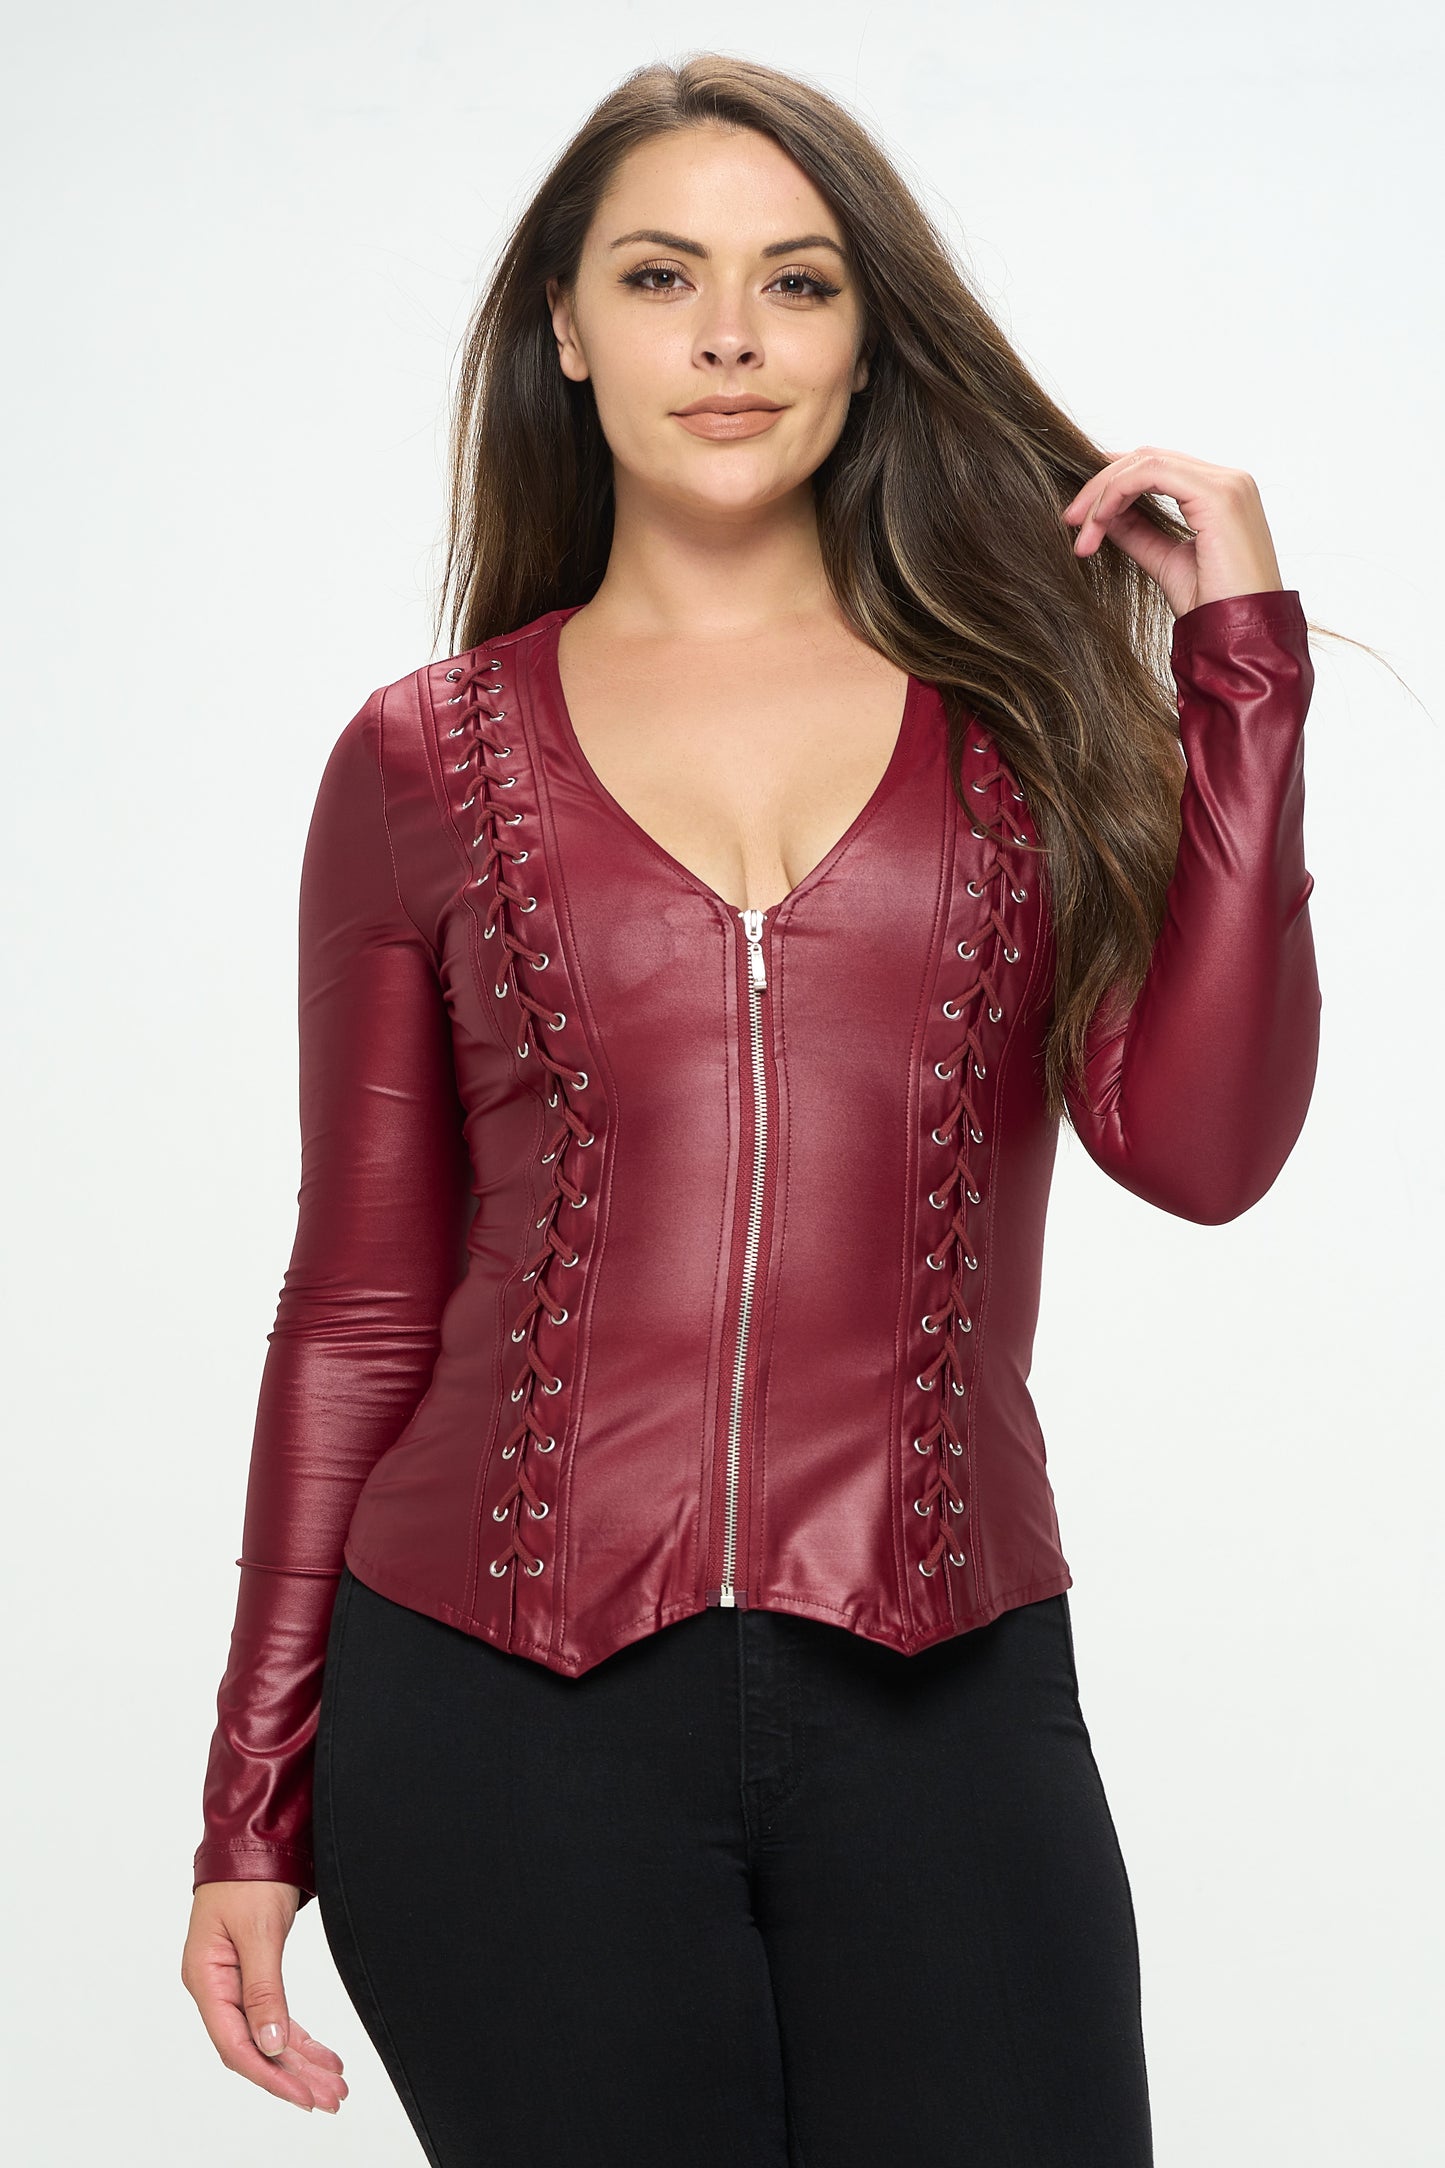 LACE-UP DETAIL ZIP UP LONG SLEEVE JACKET -PLUS